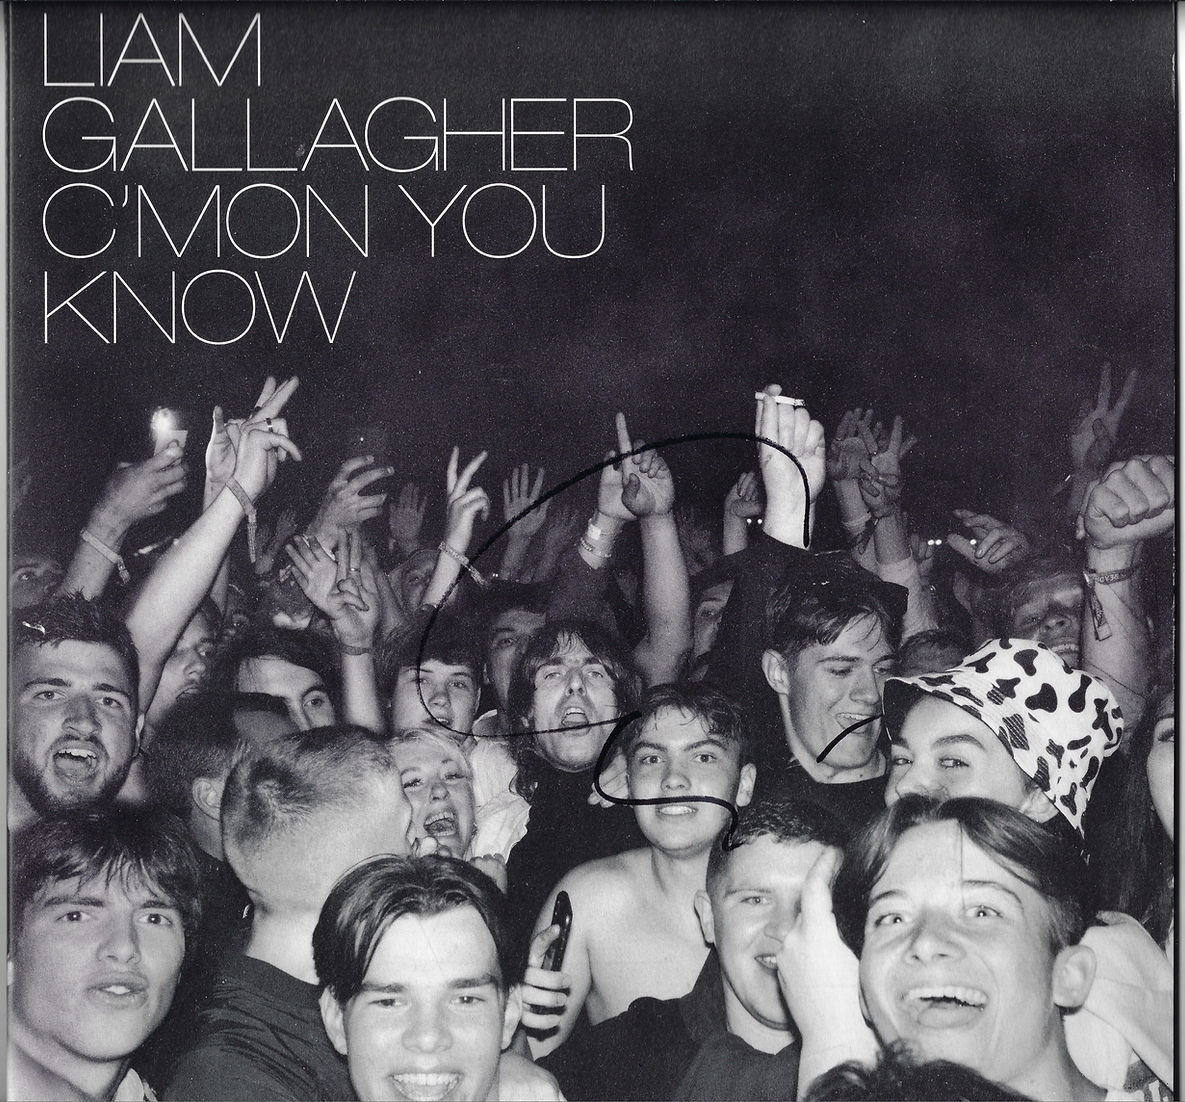 LIAM GALLAGHER SIGNED C’MON YOU KNOW VINYL LP (AFTAL WITNESSED COA) 2